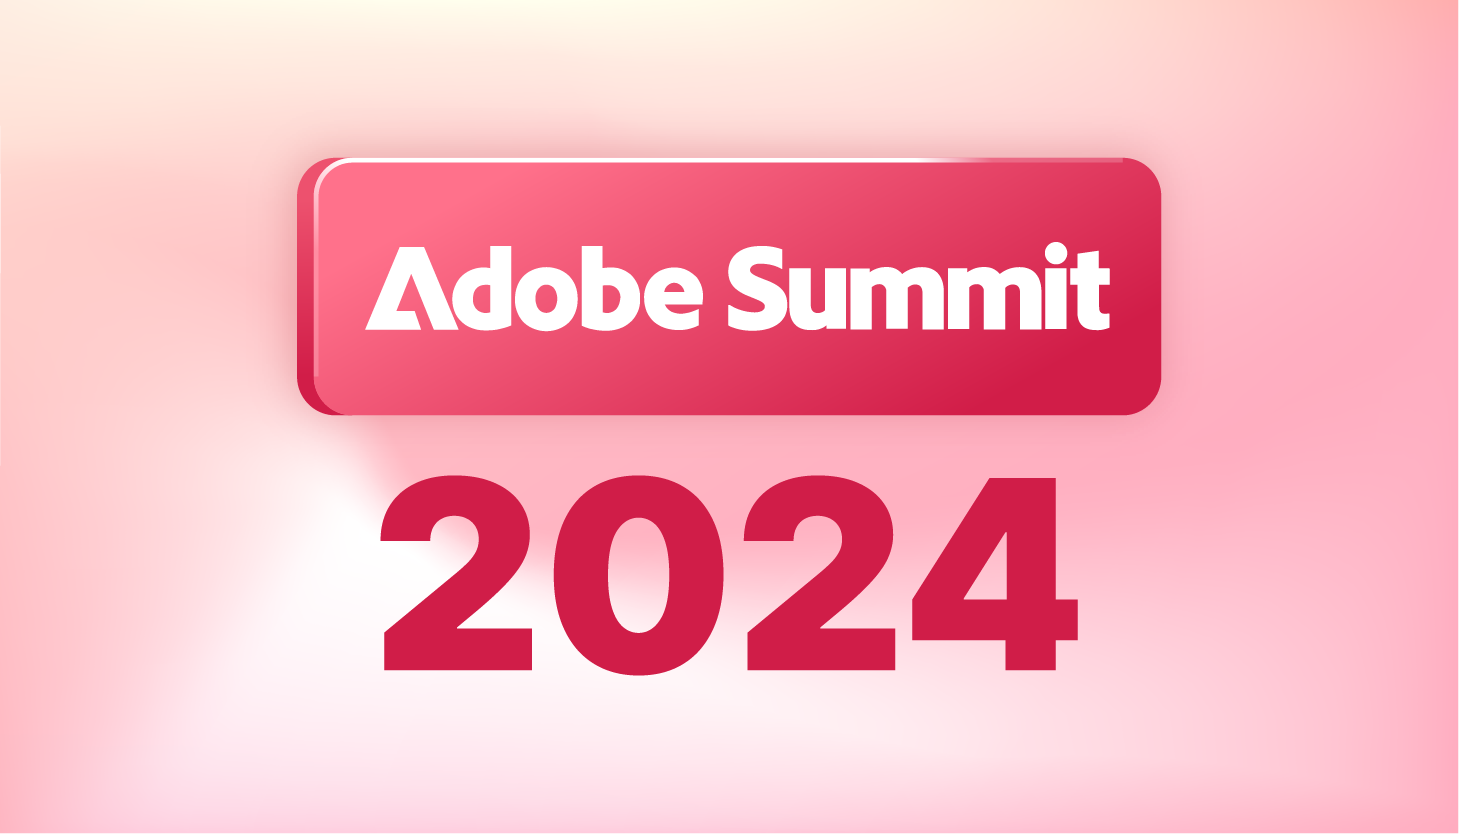 Adobe Summit 2024: What to Expect at Magento Conference in Las Vegas?